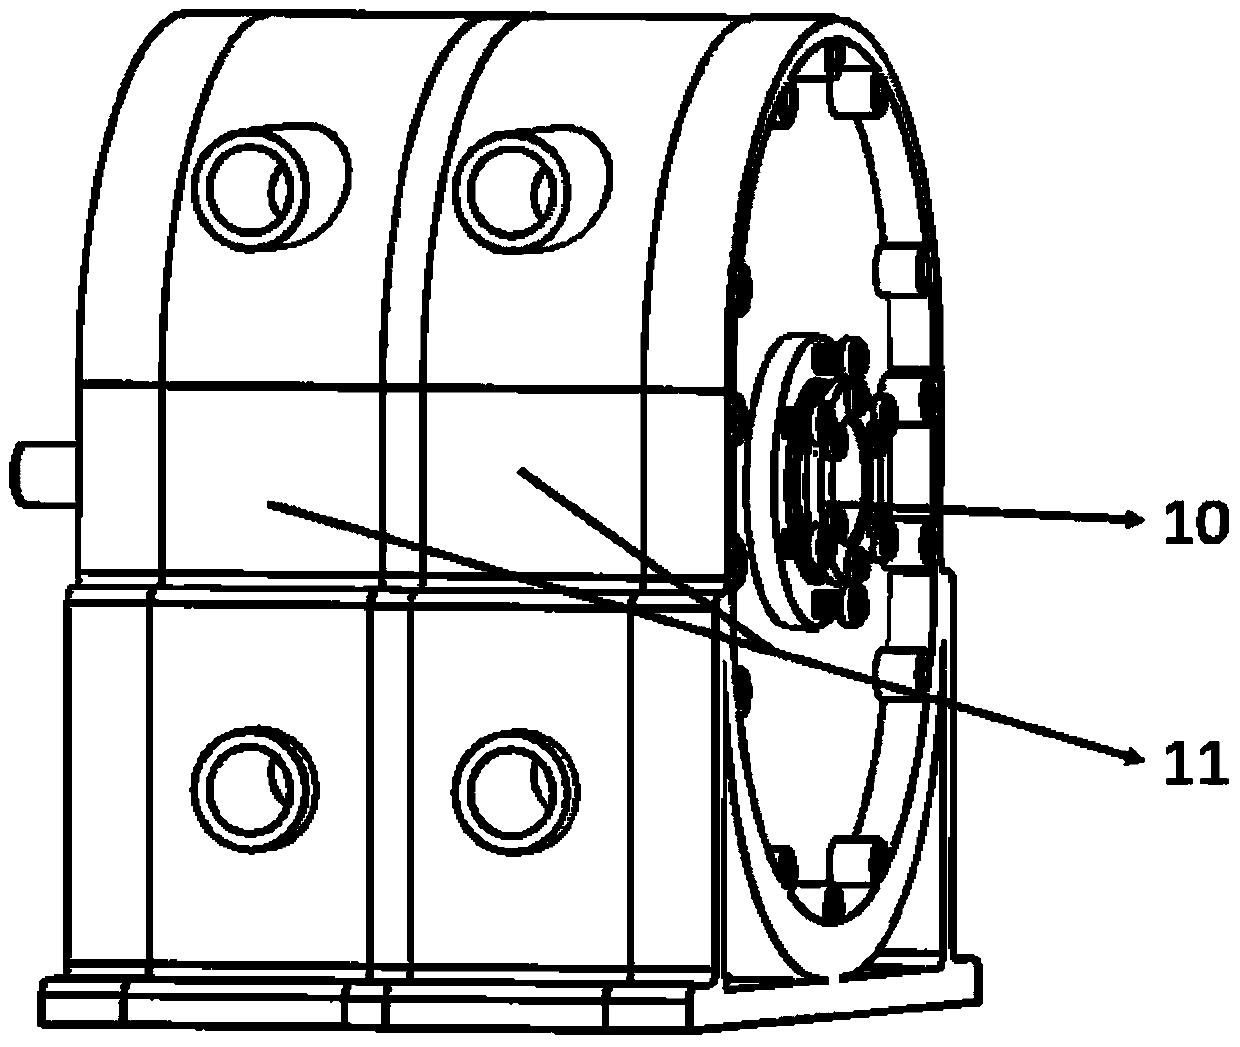 A double-cylinder eccentric rotary pump